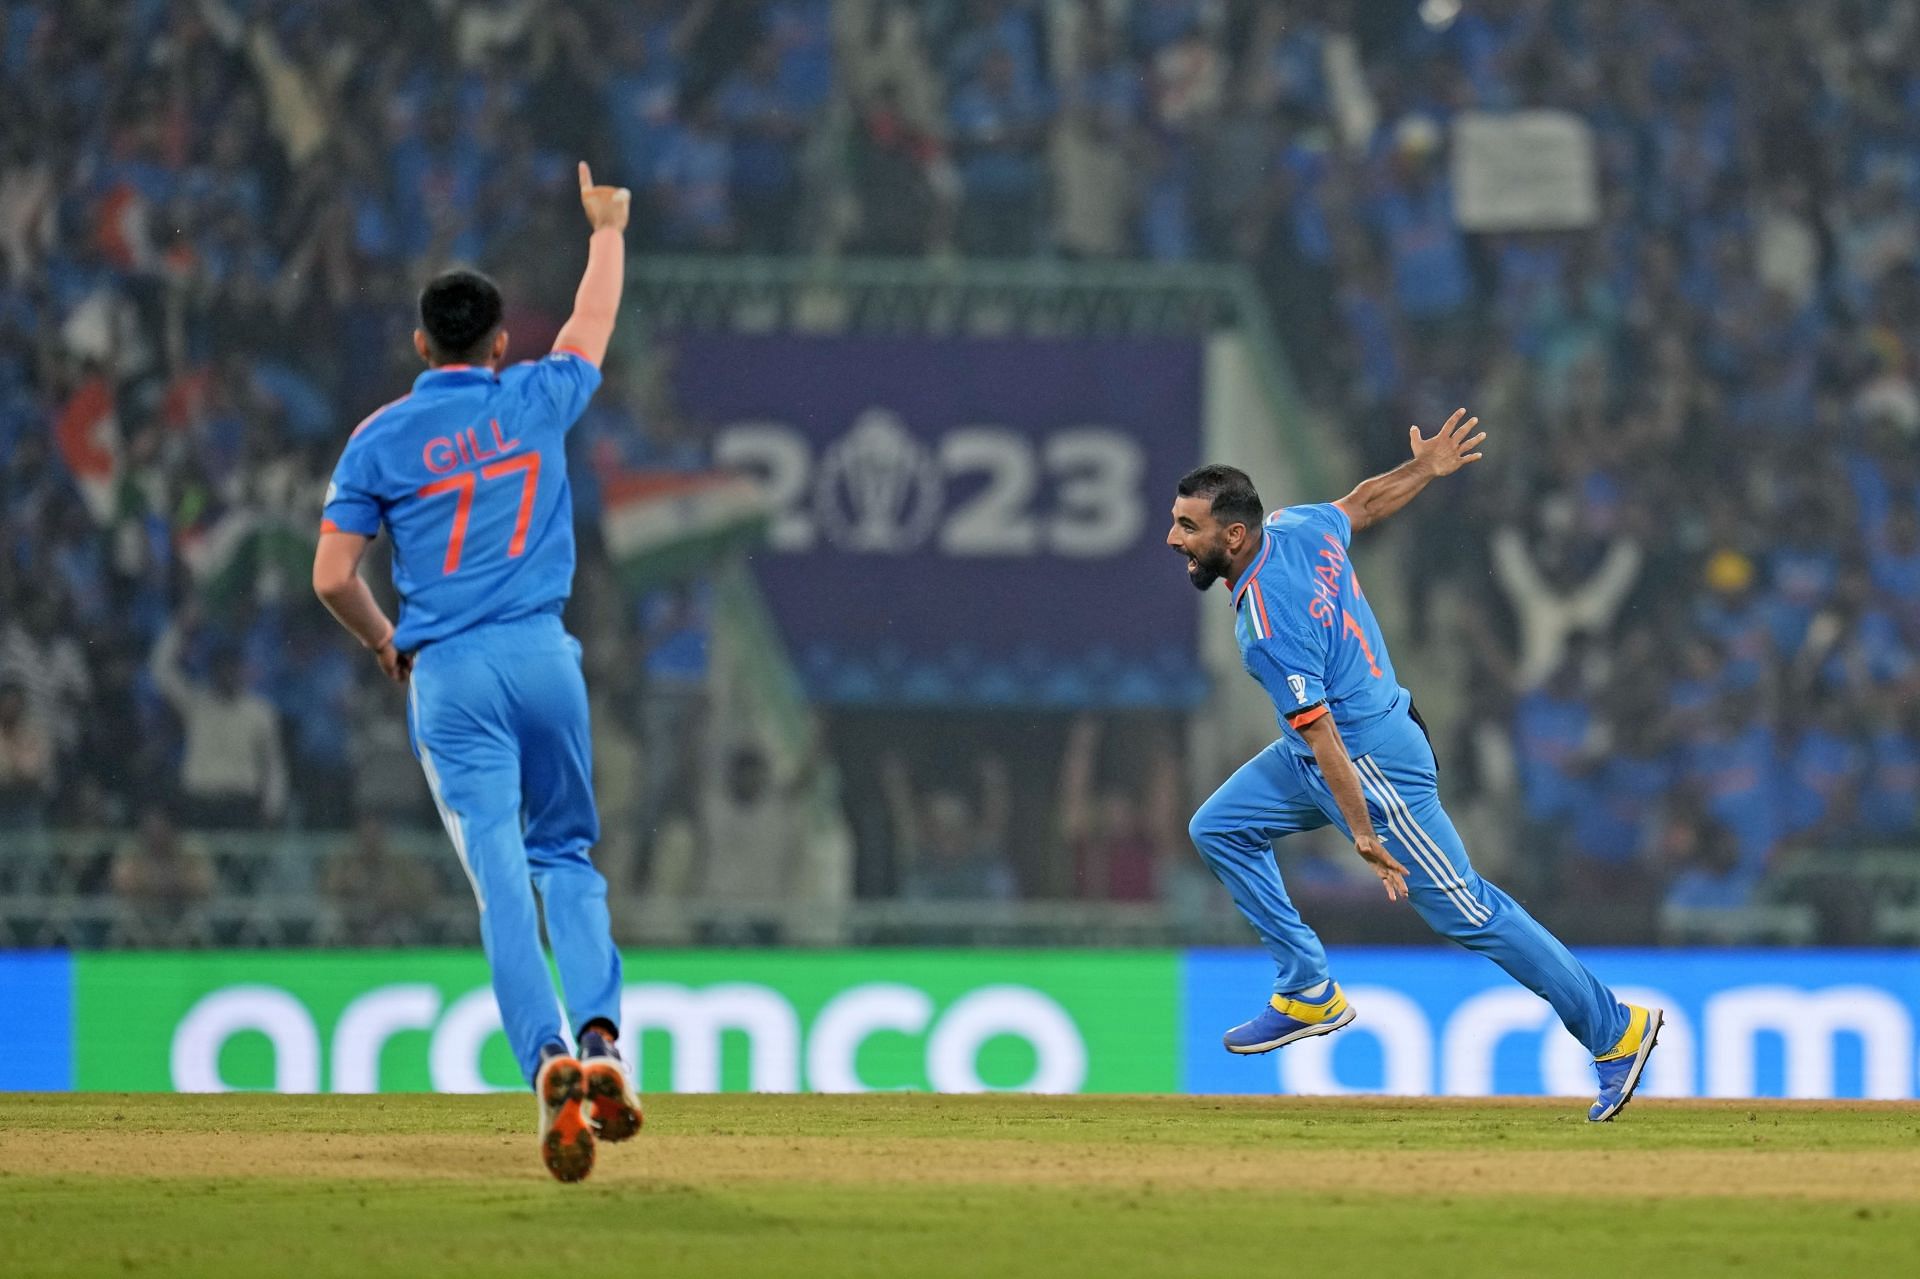 Mohammed Shami&#039;s sensational spell went a long way in India restricting England